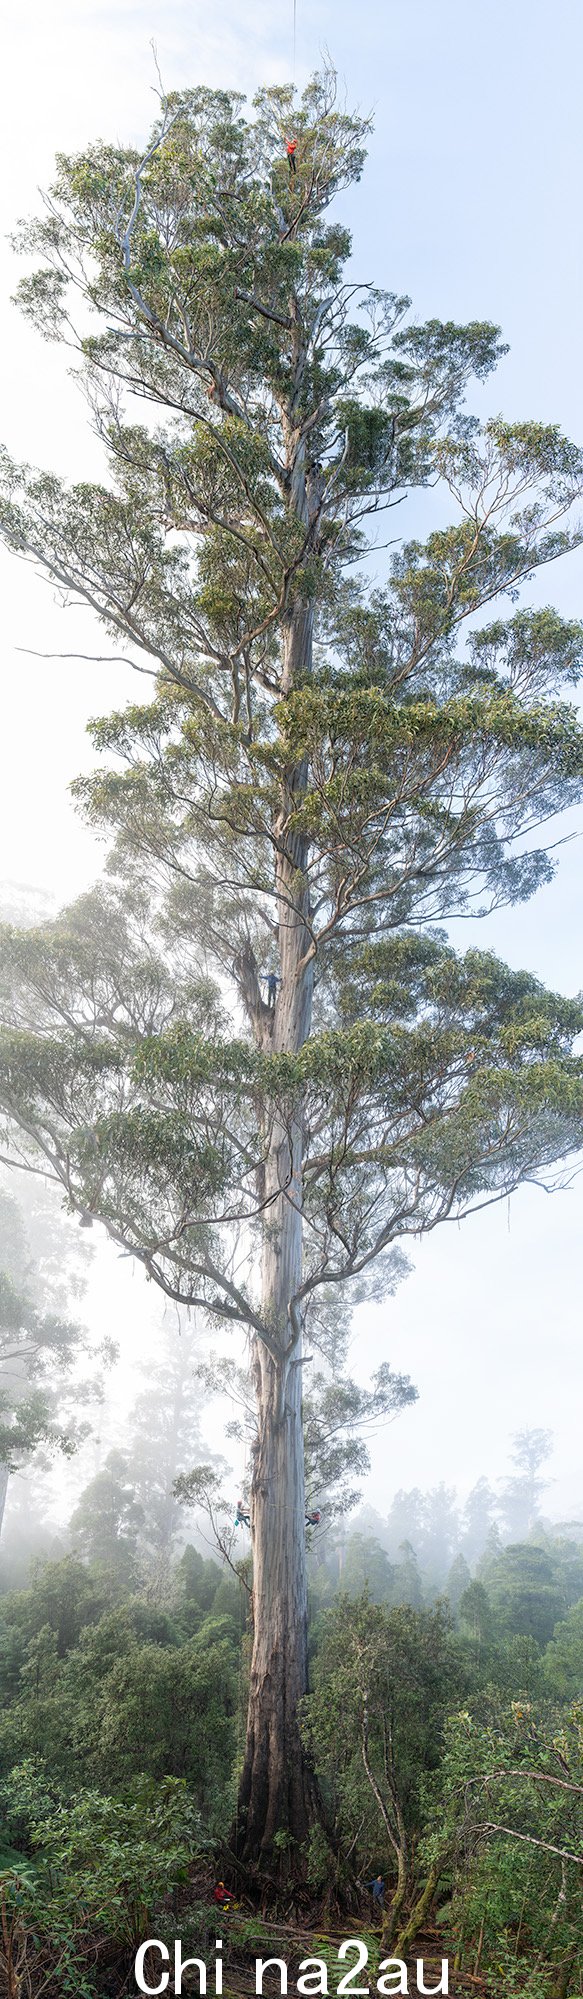 An absolutely enormous eucalpytus tree, with people looking tiny at various points up the tree.